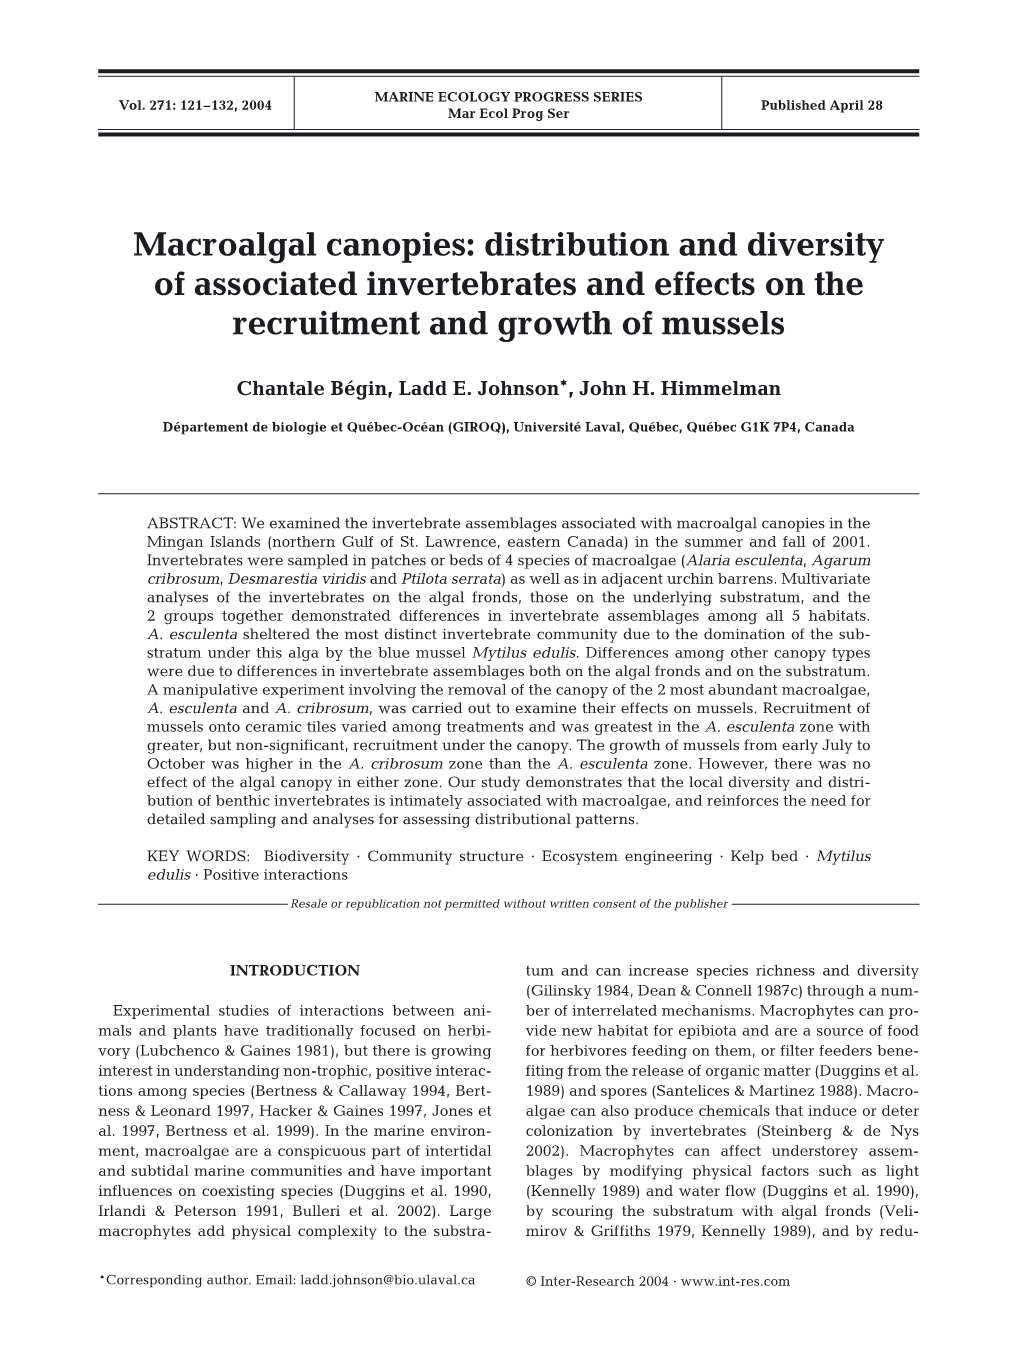 Macroalgal Canopies: Distribution and Diversity of Associated Invertebrates and Effects on the Recruitment and Growth of Mussels